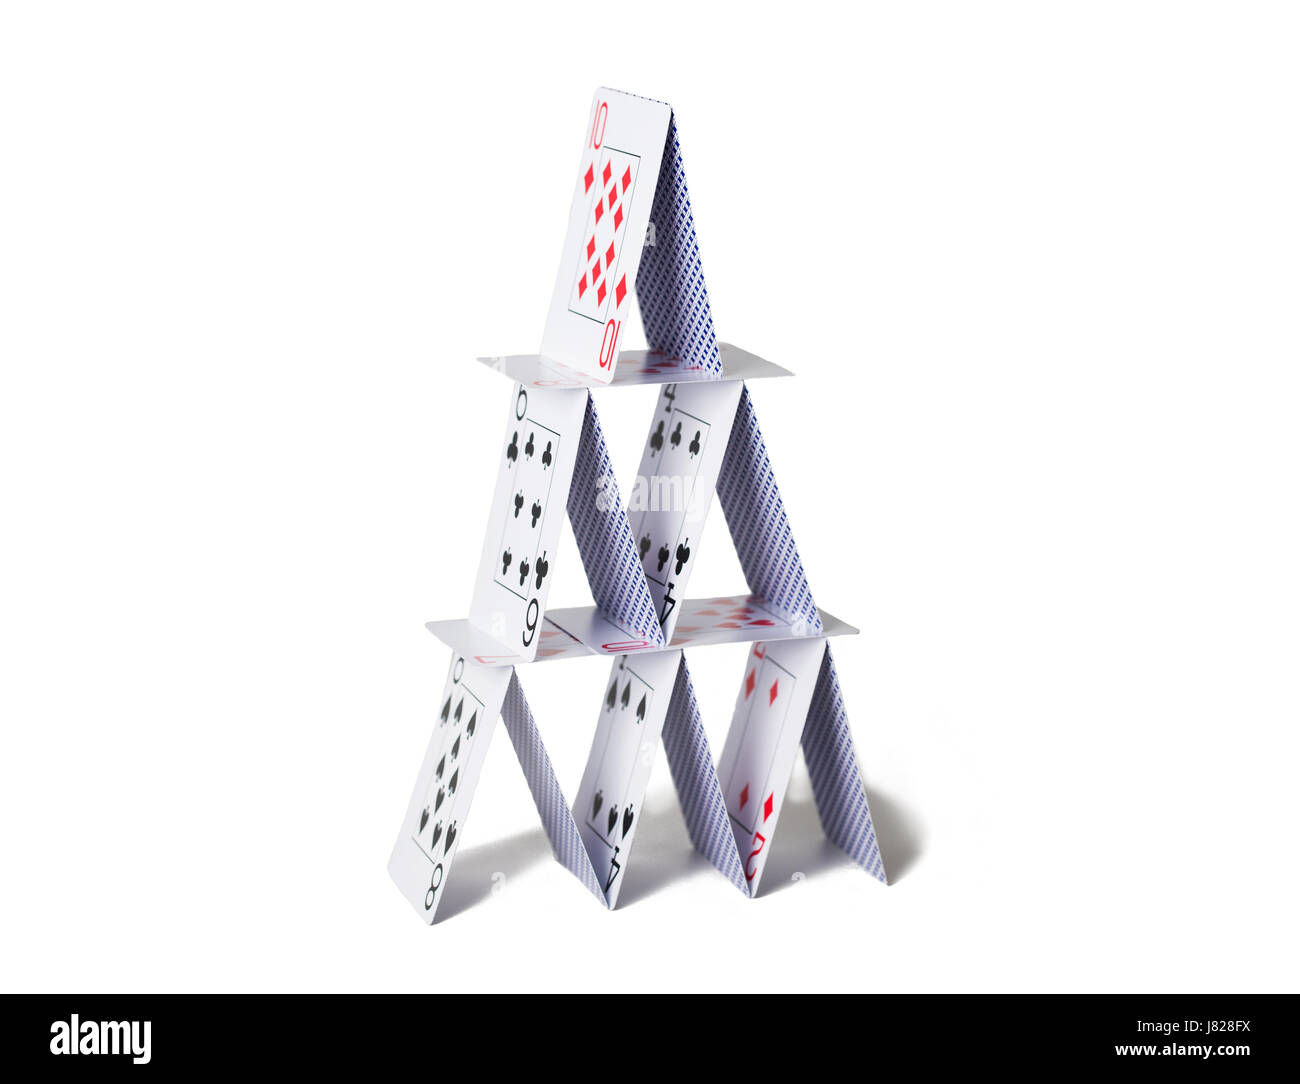 house of playing cards over white background Stock Photo